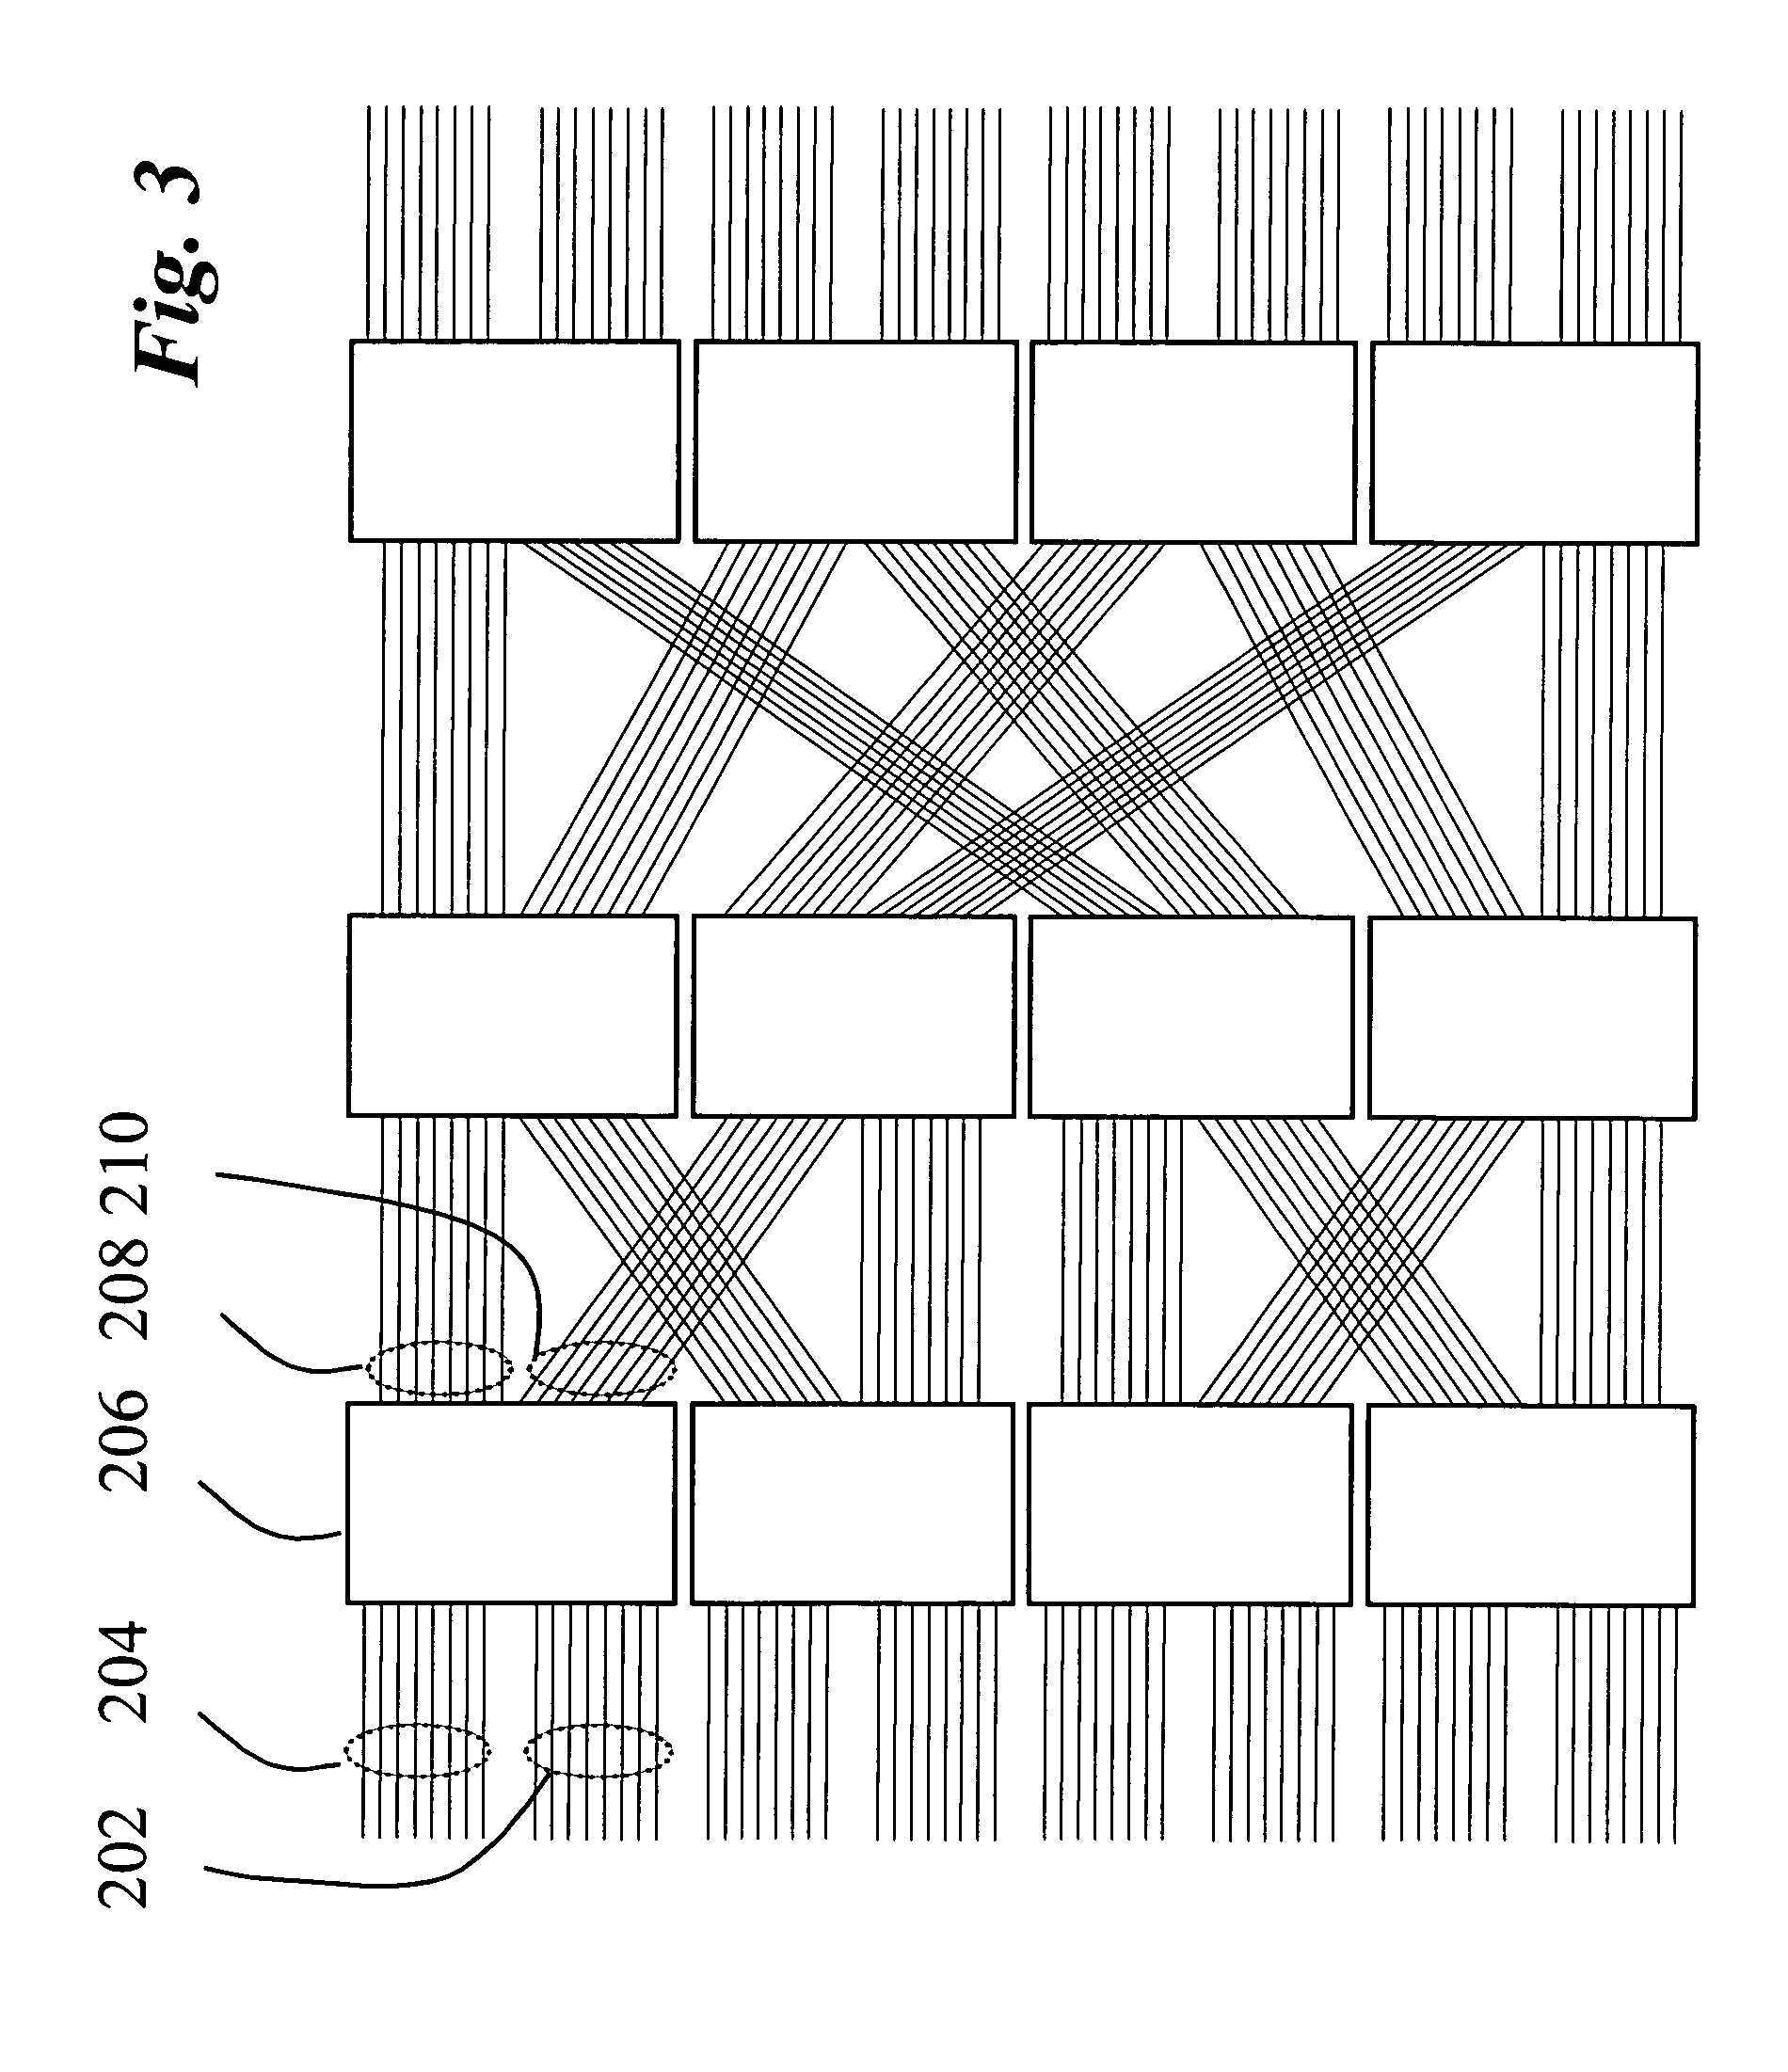 Switching by multistage interconnection of concentrators